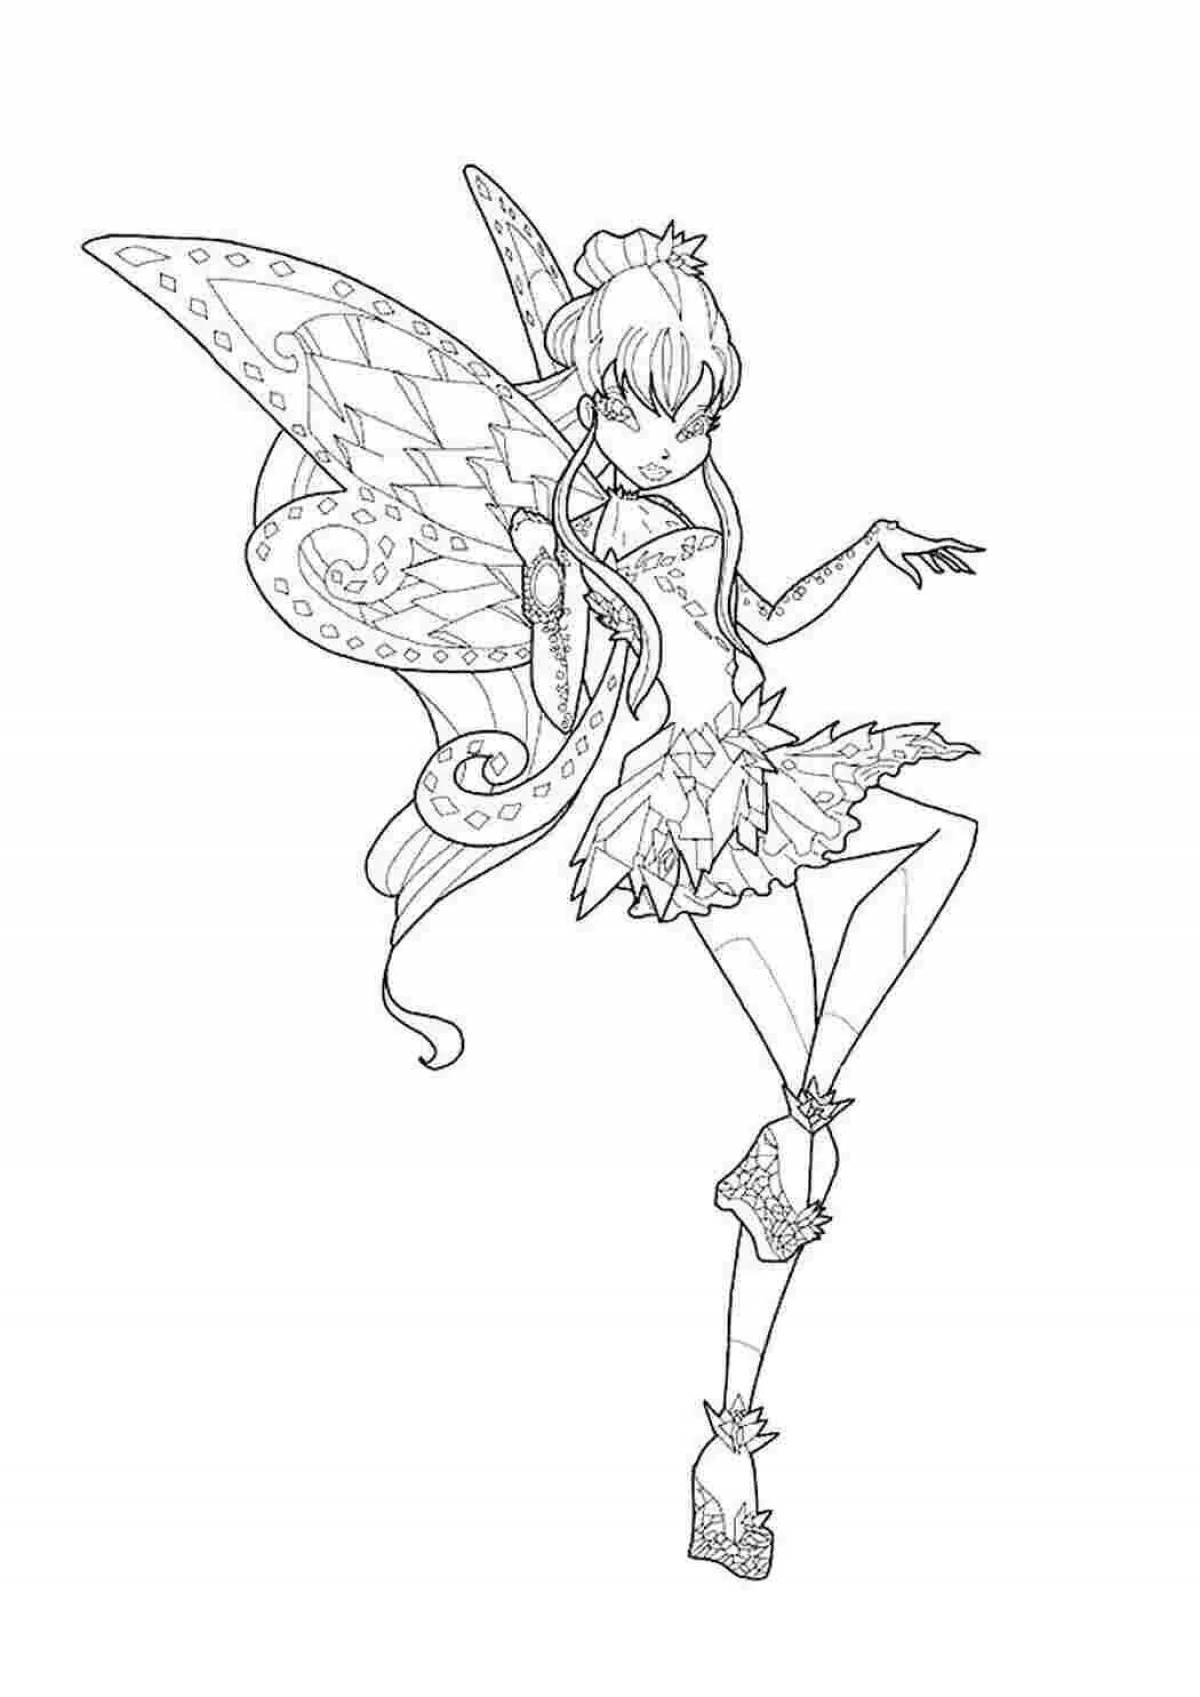 Mysterious cynox winx coloring page